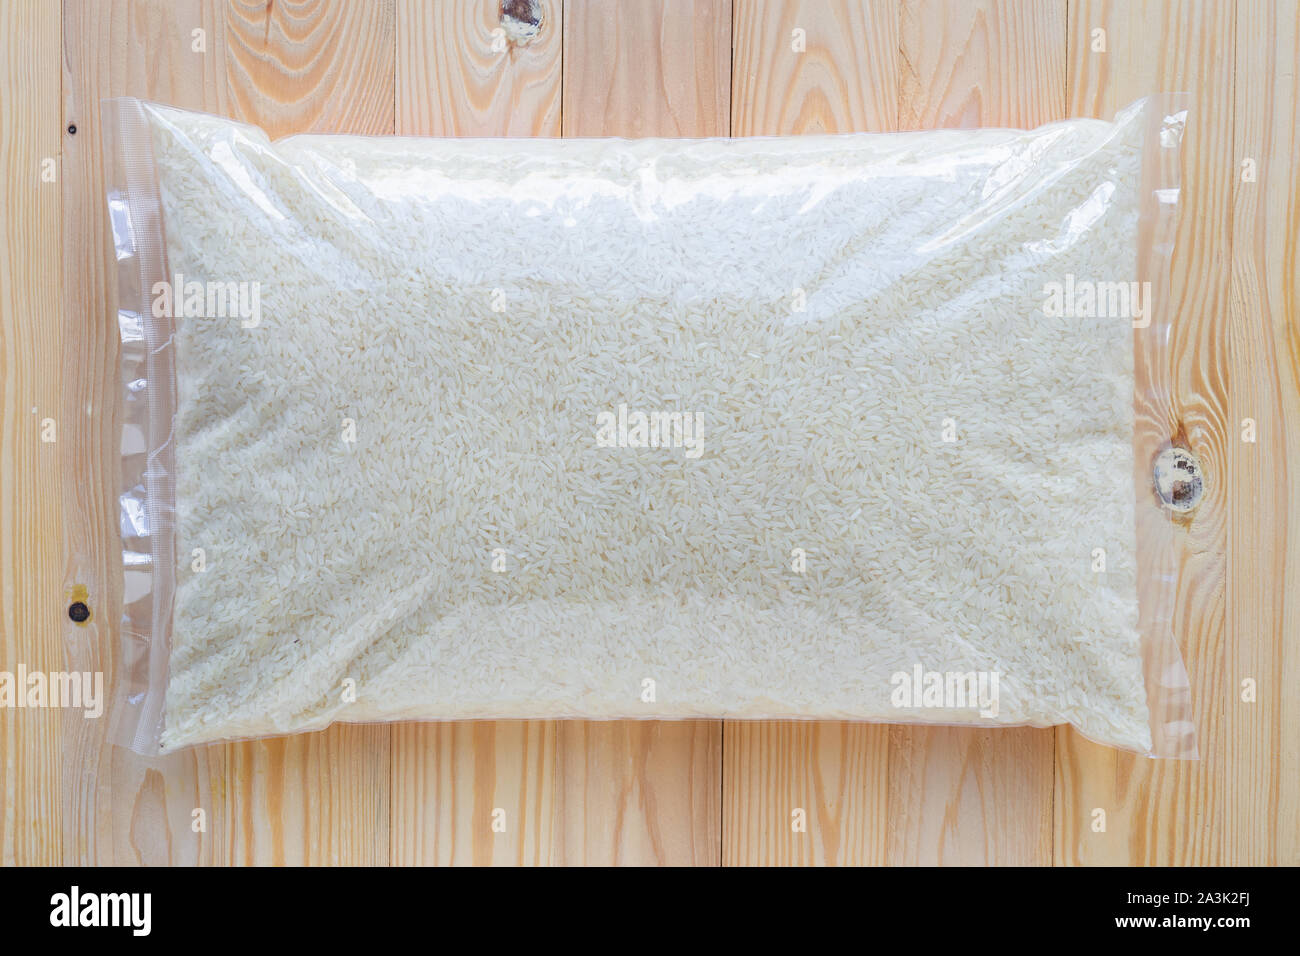 Download Rice In A Clear Plastic Bag On A Wooden Floor Stock Photo Alamy